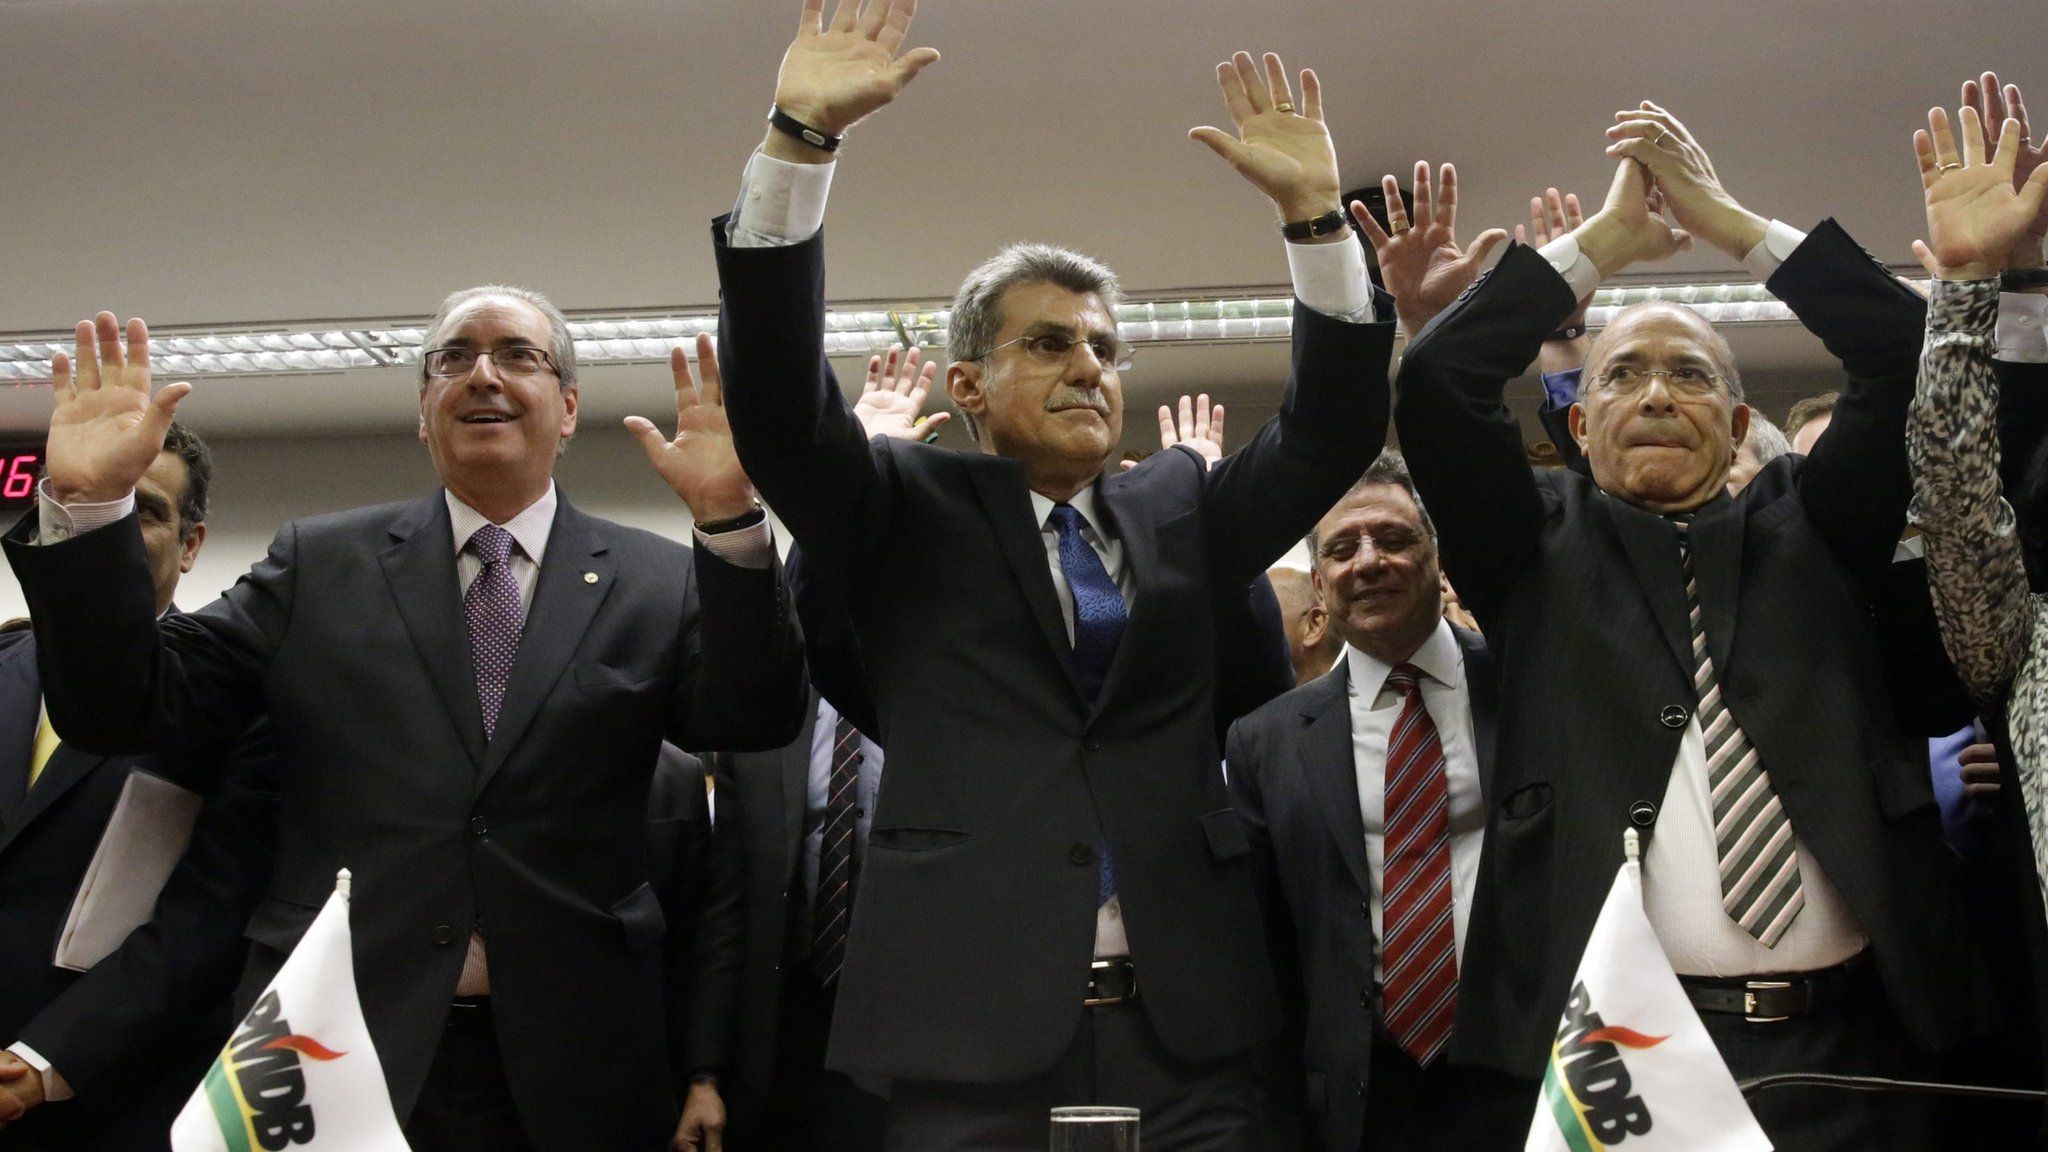 PMDB leaders celebrate after announcing they are withdrawing support for President Rousseff's ruling coalition during National Executive Meeting in Brasilia. March 29, 2016